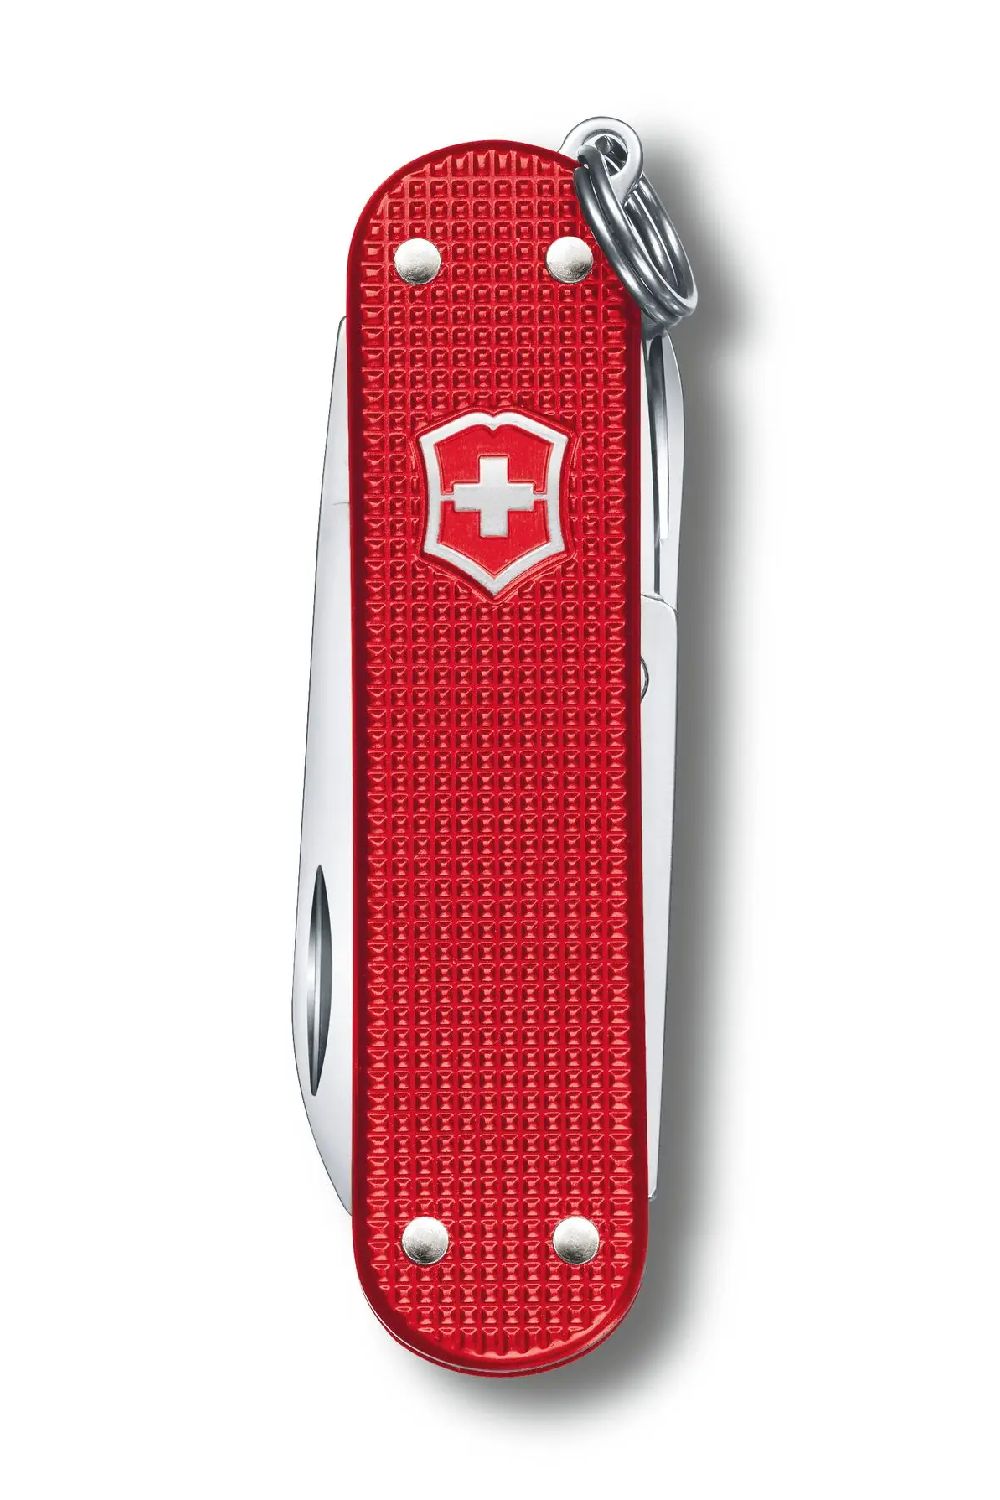 Victorinox Classic SD Alox Swiss Army Small Pocket Knife in Sweet Berry 